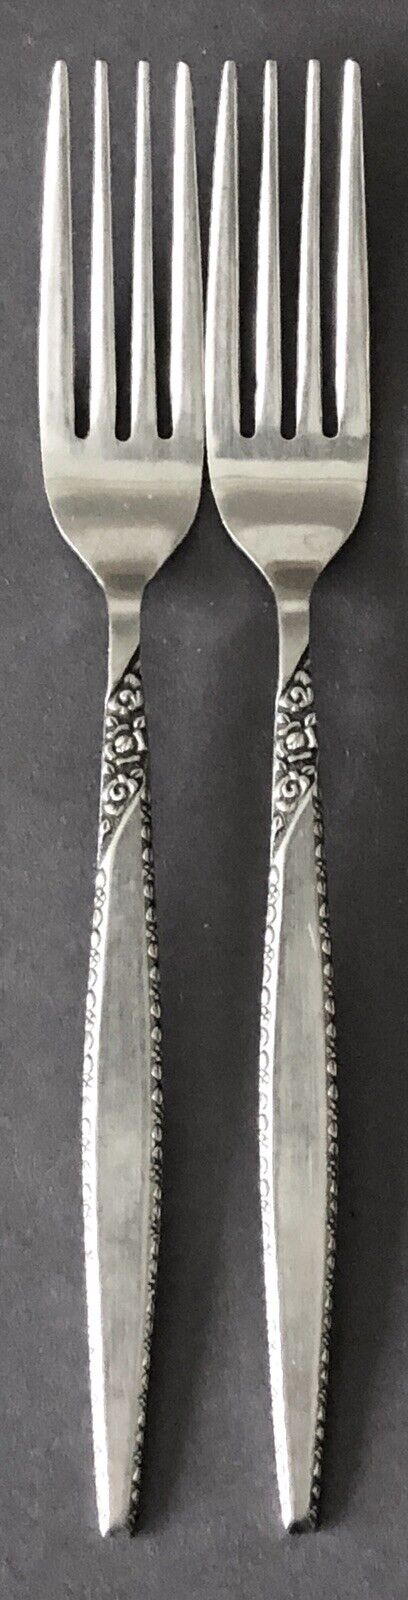 Orleans Stainless ORL8 ORL 8 Stainless Steel DINNER Fork FORKS X2 LOT Set Of TWO